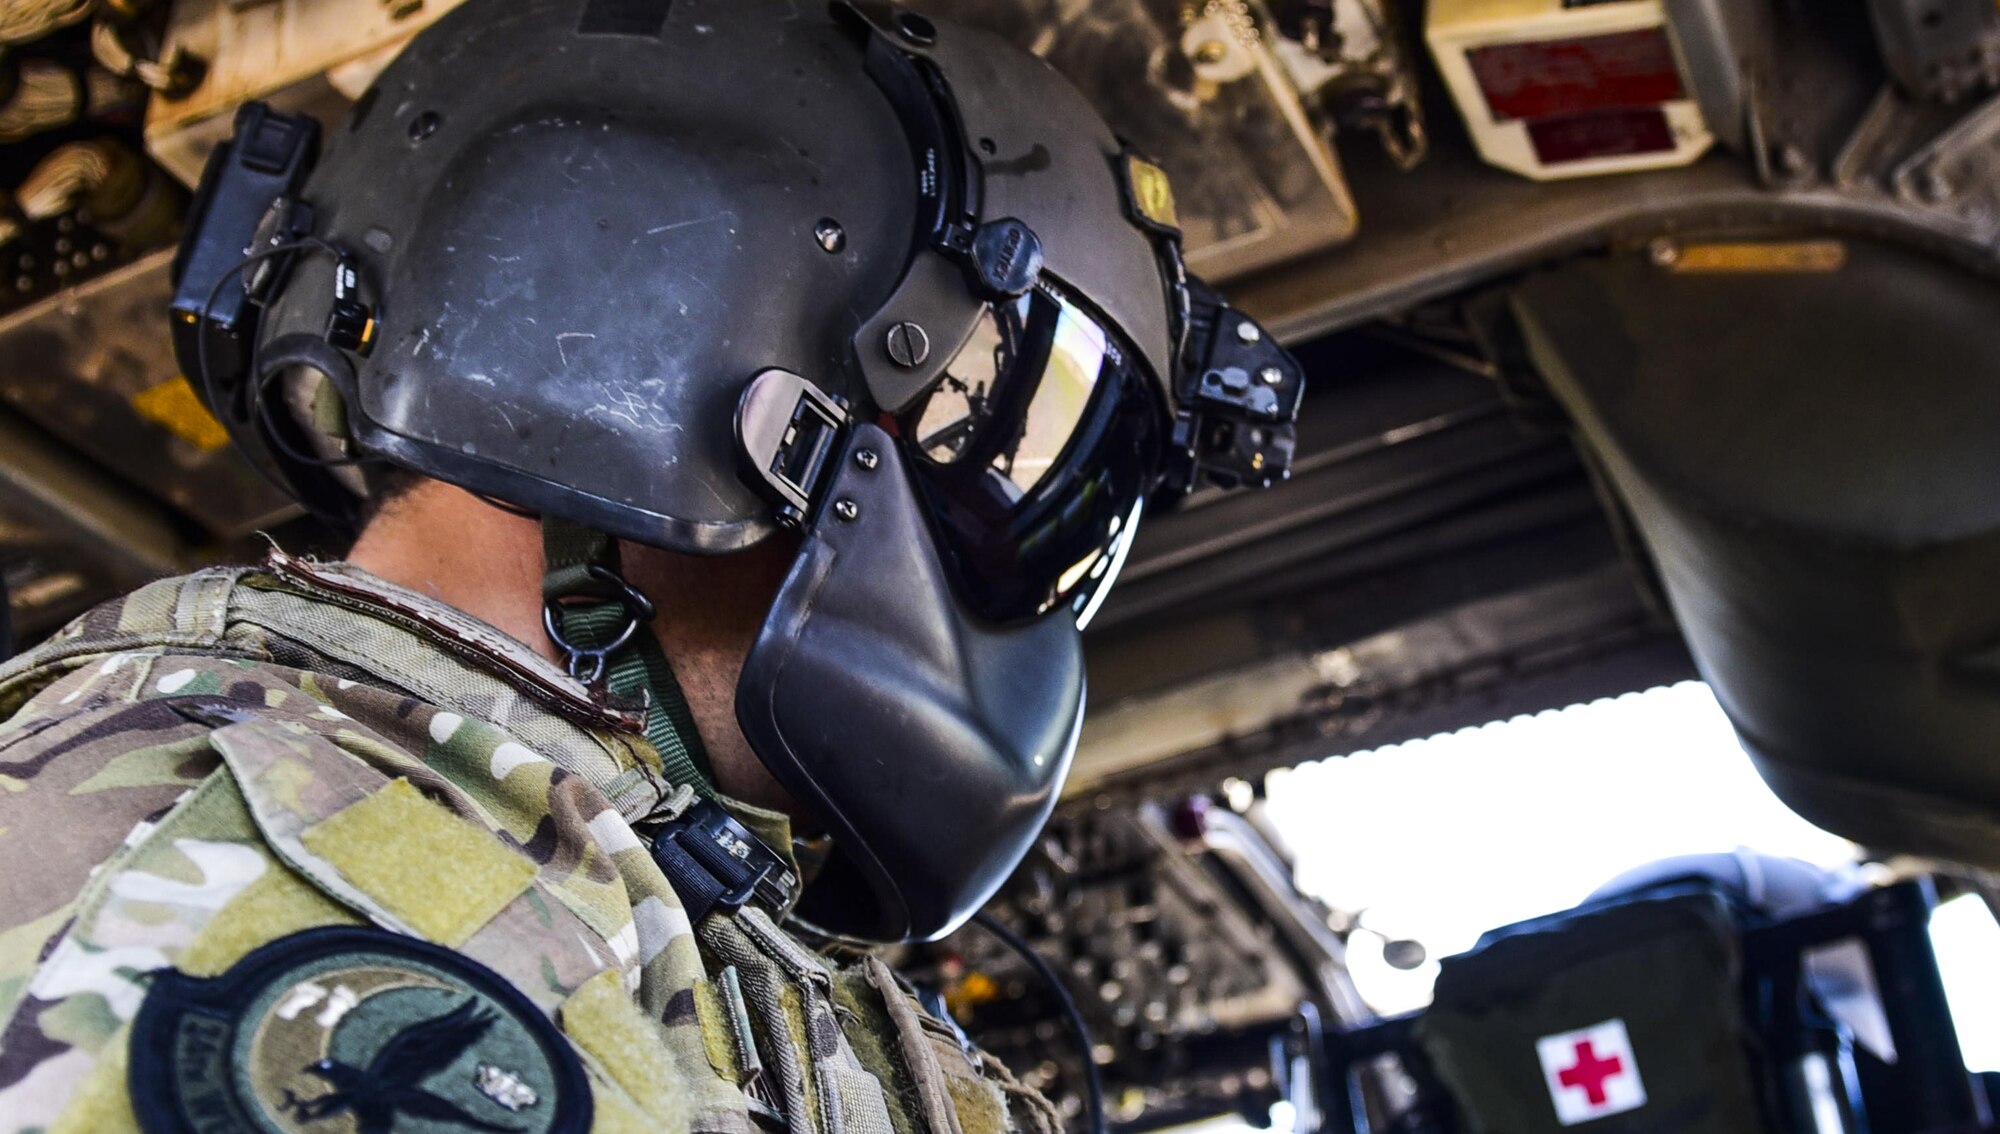 Staff Sgt. Christian Nault, 34th Weapons Squadron special mission aviator, performs a system check on an HH-60G Pave Hawk helicopter during a Weapons School Integration mission at the Nevada Test and Training Range June 1, 2017. Special mission aviators are responsible for assisting the pilots with everything from pre-flight inspections to weapon defense, if needed. (U.S. Air Force photo by Airman 1st Class Andrew D. Sarver/Released)